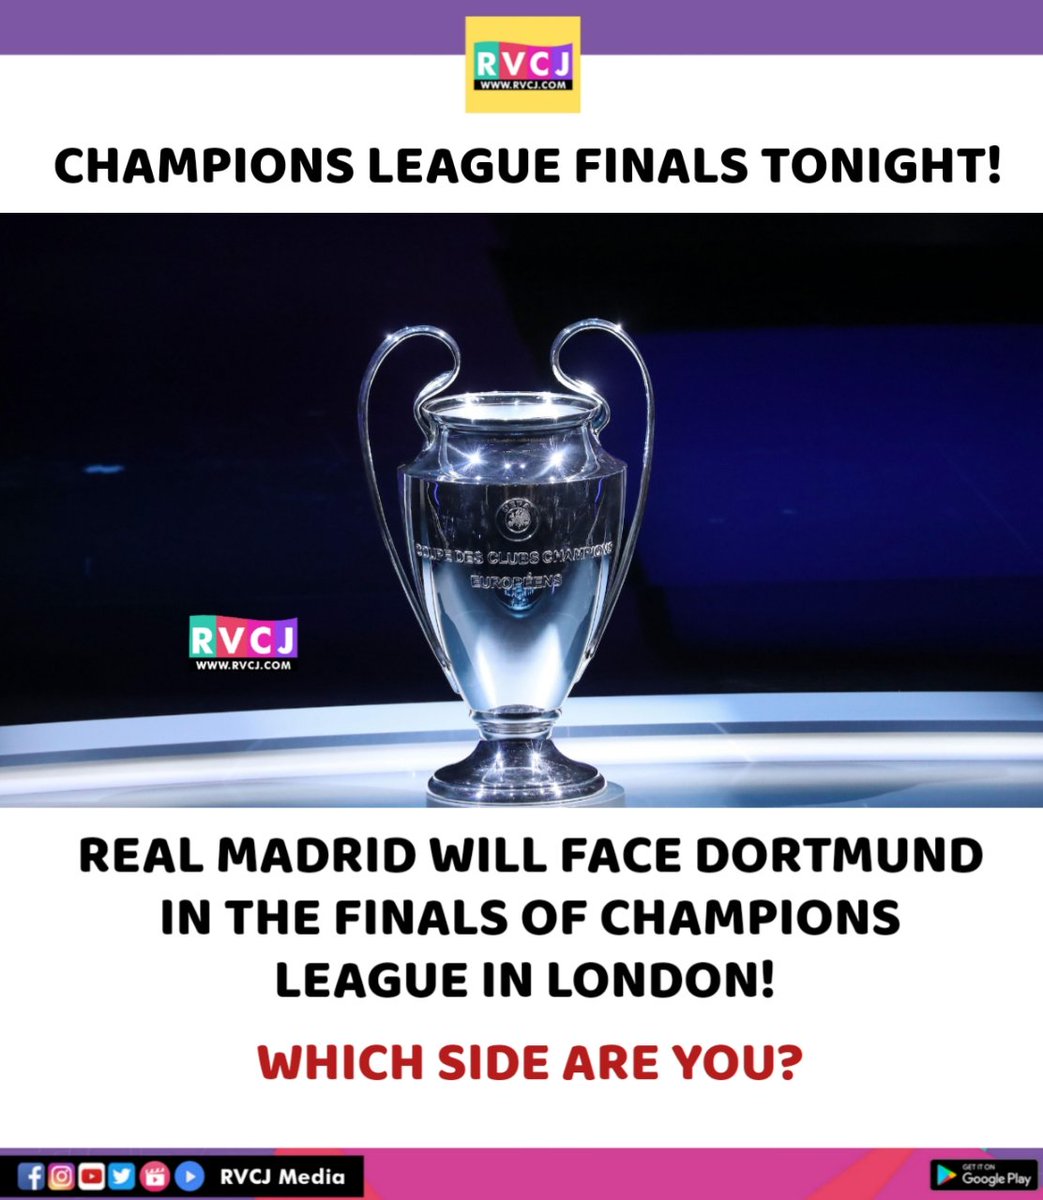 Champions league Final is here!